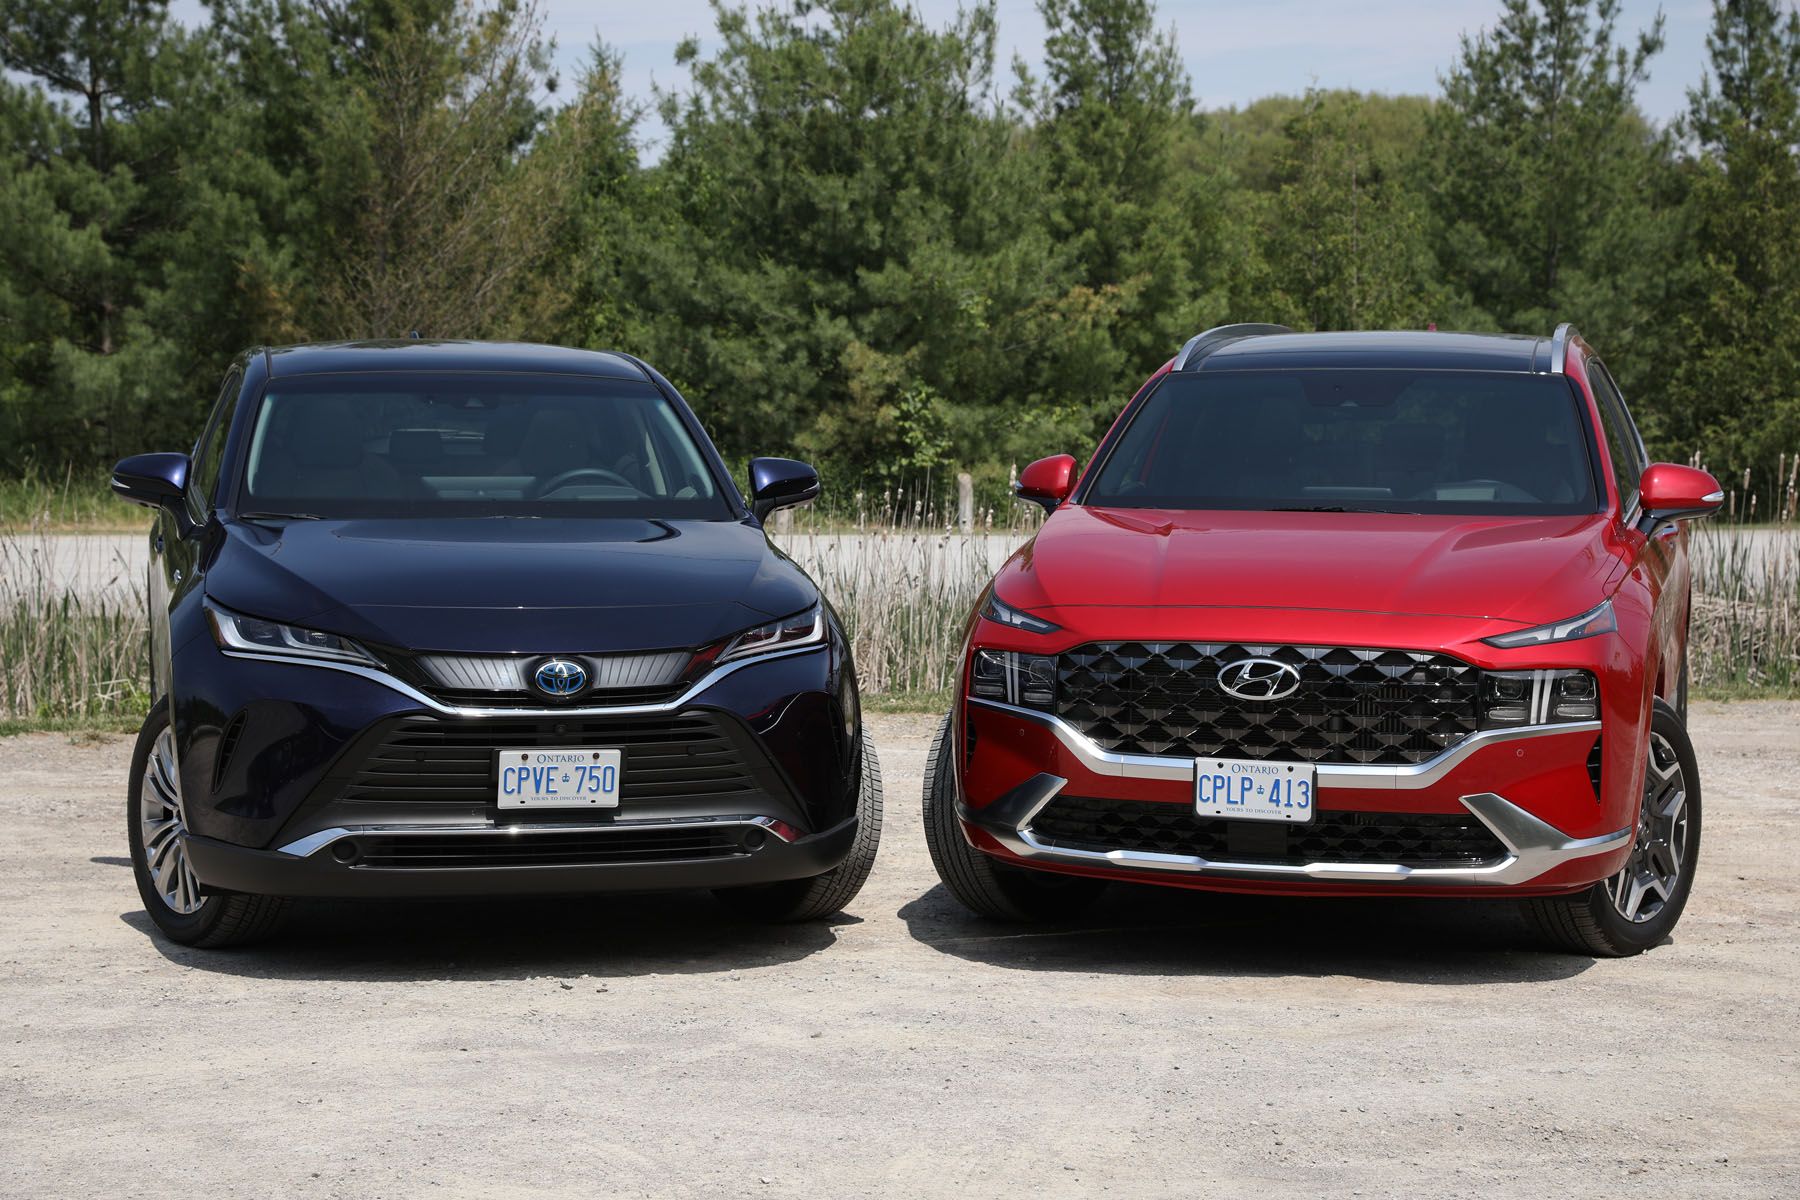 The 2021 Hyundai Santa Fe - Mid-Sized Favorite with Safety on the Brain